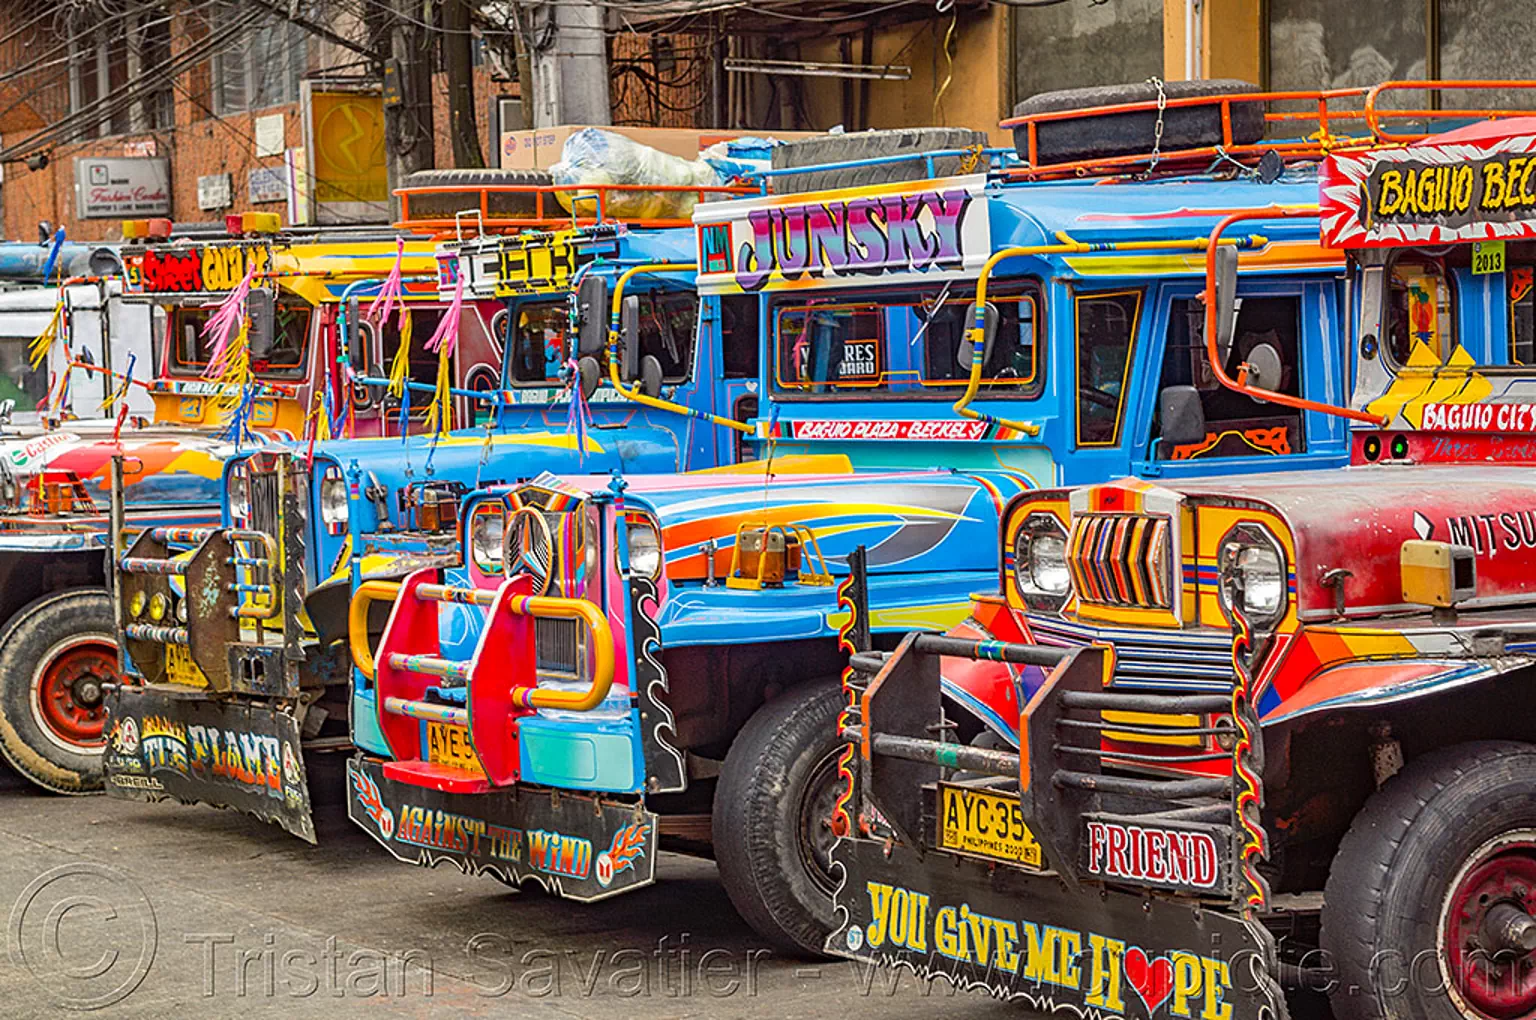 jeepneys parked at station (philippines), baguio, colorful, decorated, jeepney, painted, philippines, truck